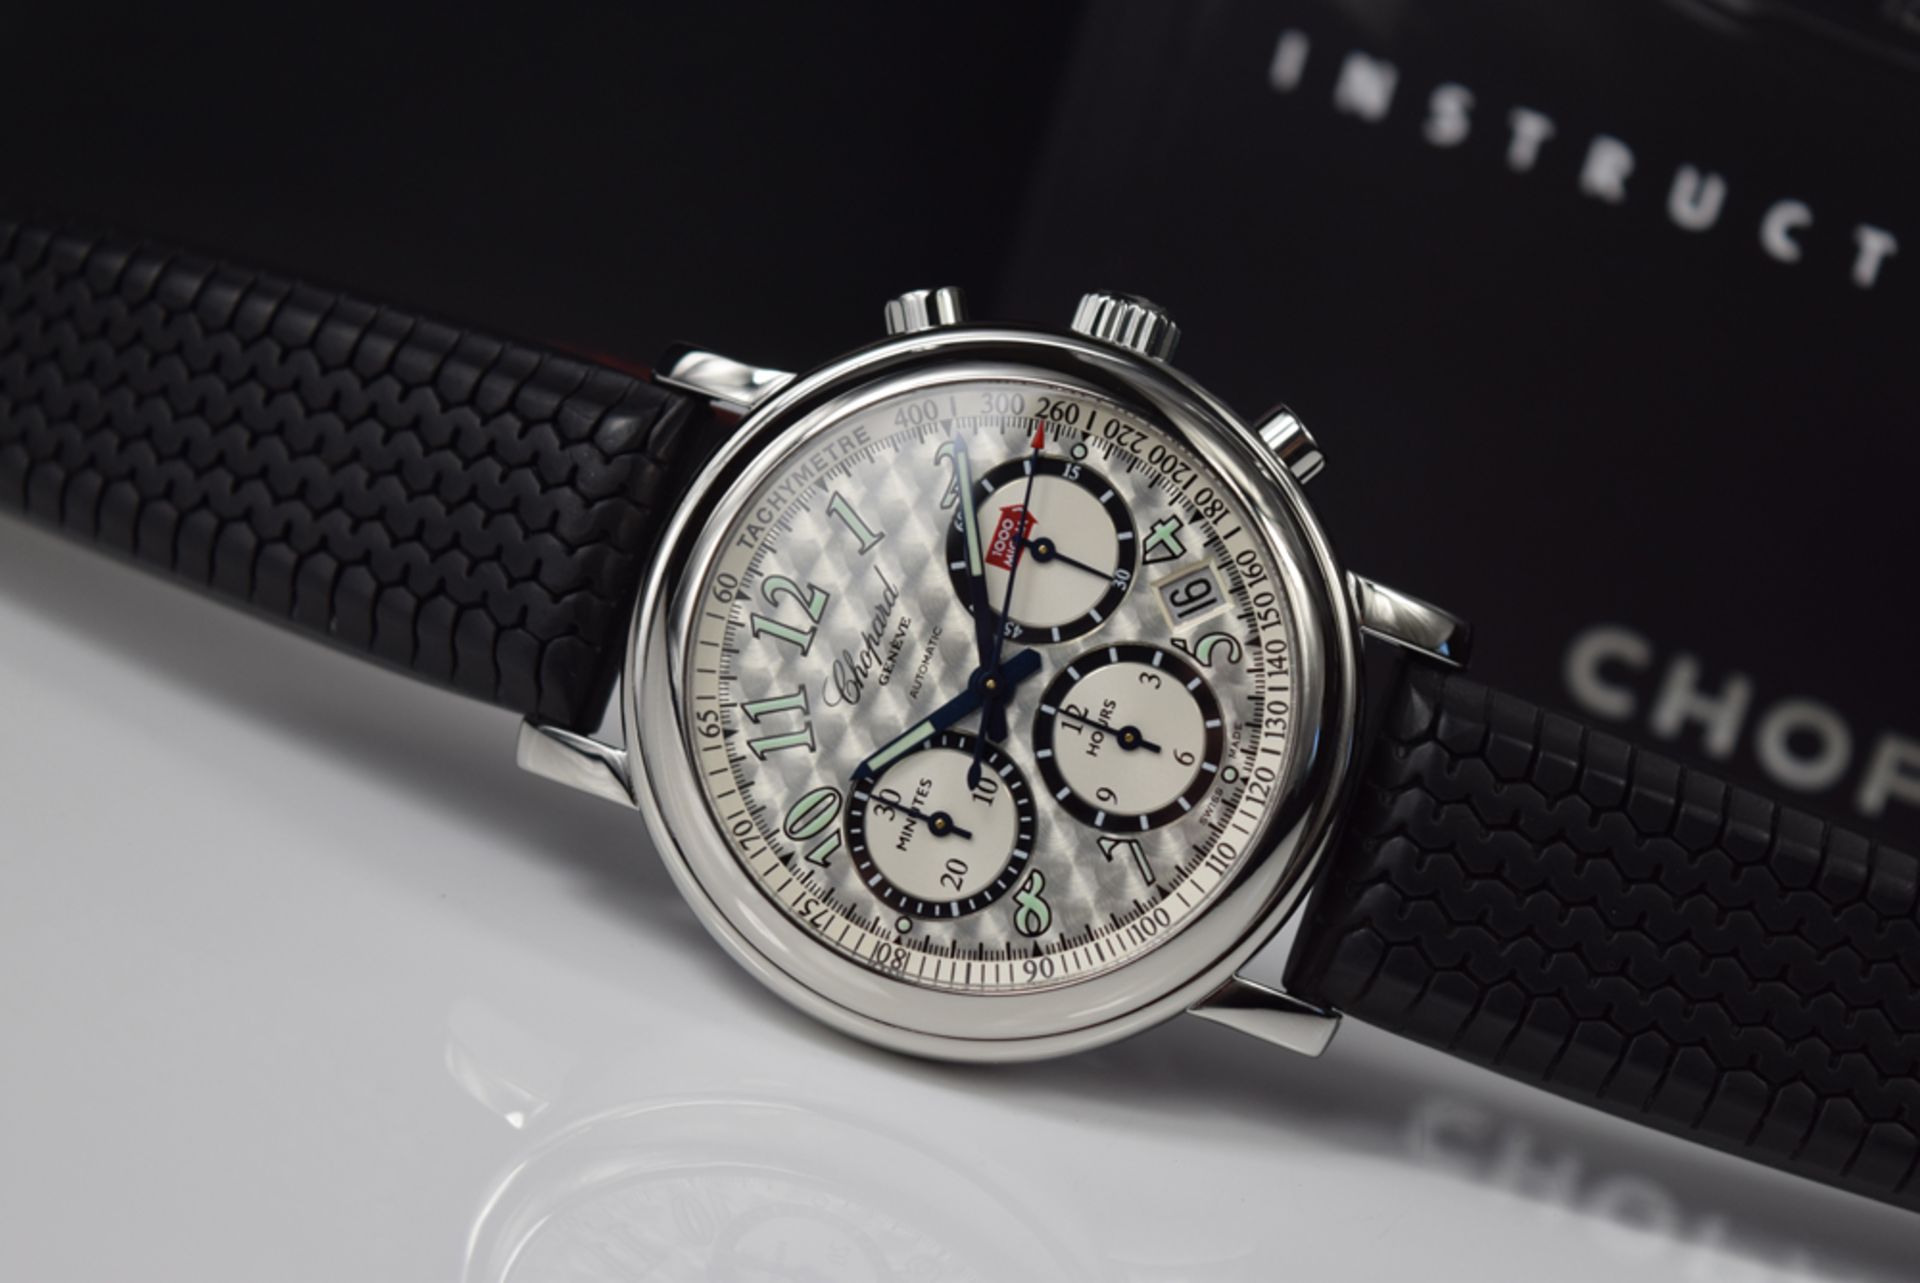 CHOPARD – MILLE MIGLIA CHRONOGRAPH; 8331 (STEEL / BLACK RUBBER) - Image 11 of 12